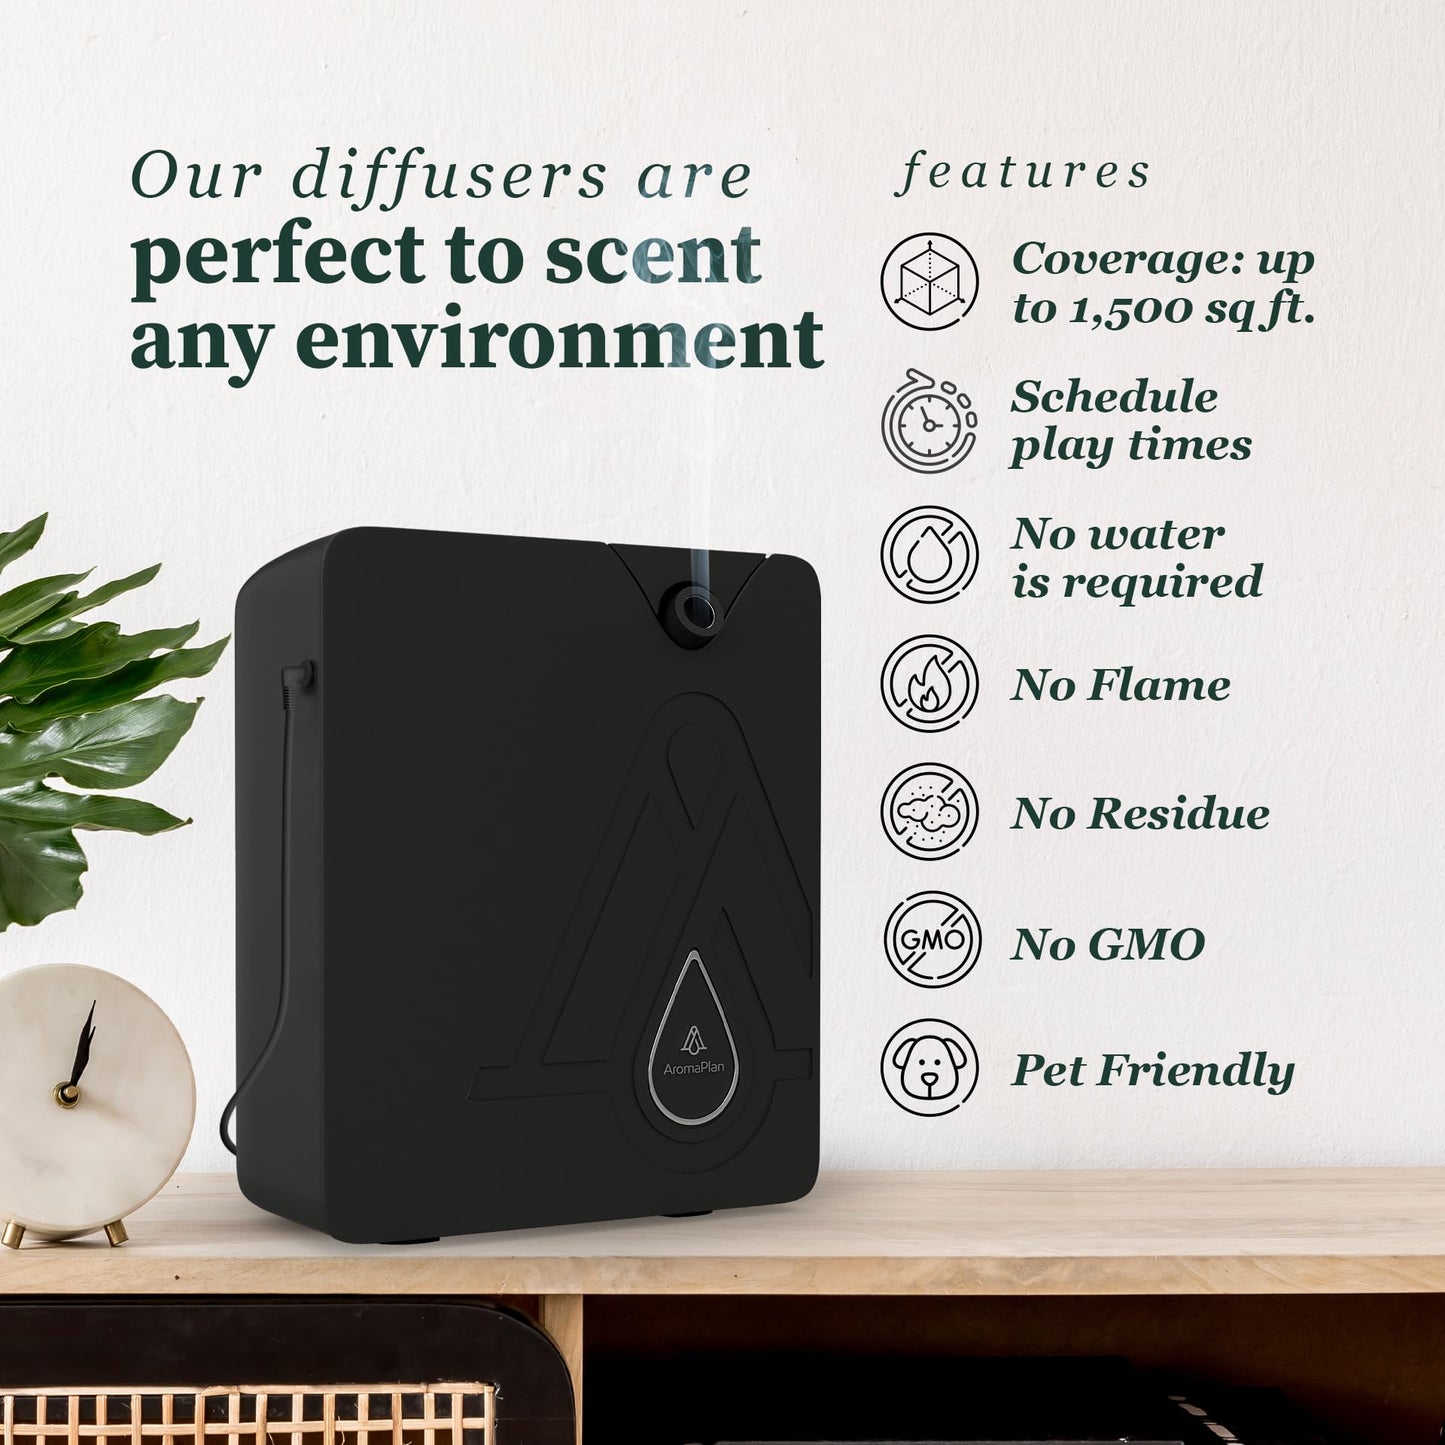 AromaPlan 2024 Upgraded Bluetooth Smart Scent Air Machine for Home, Hotel, Spa,Office– Smart Cold Air Technology, Hotel Collection Diffuser, Waterless Whole House Scent Diffuser, Black.